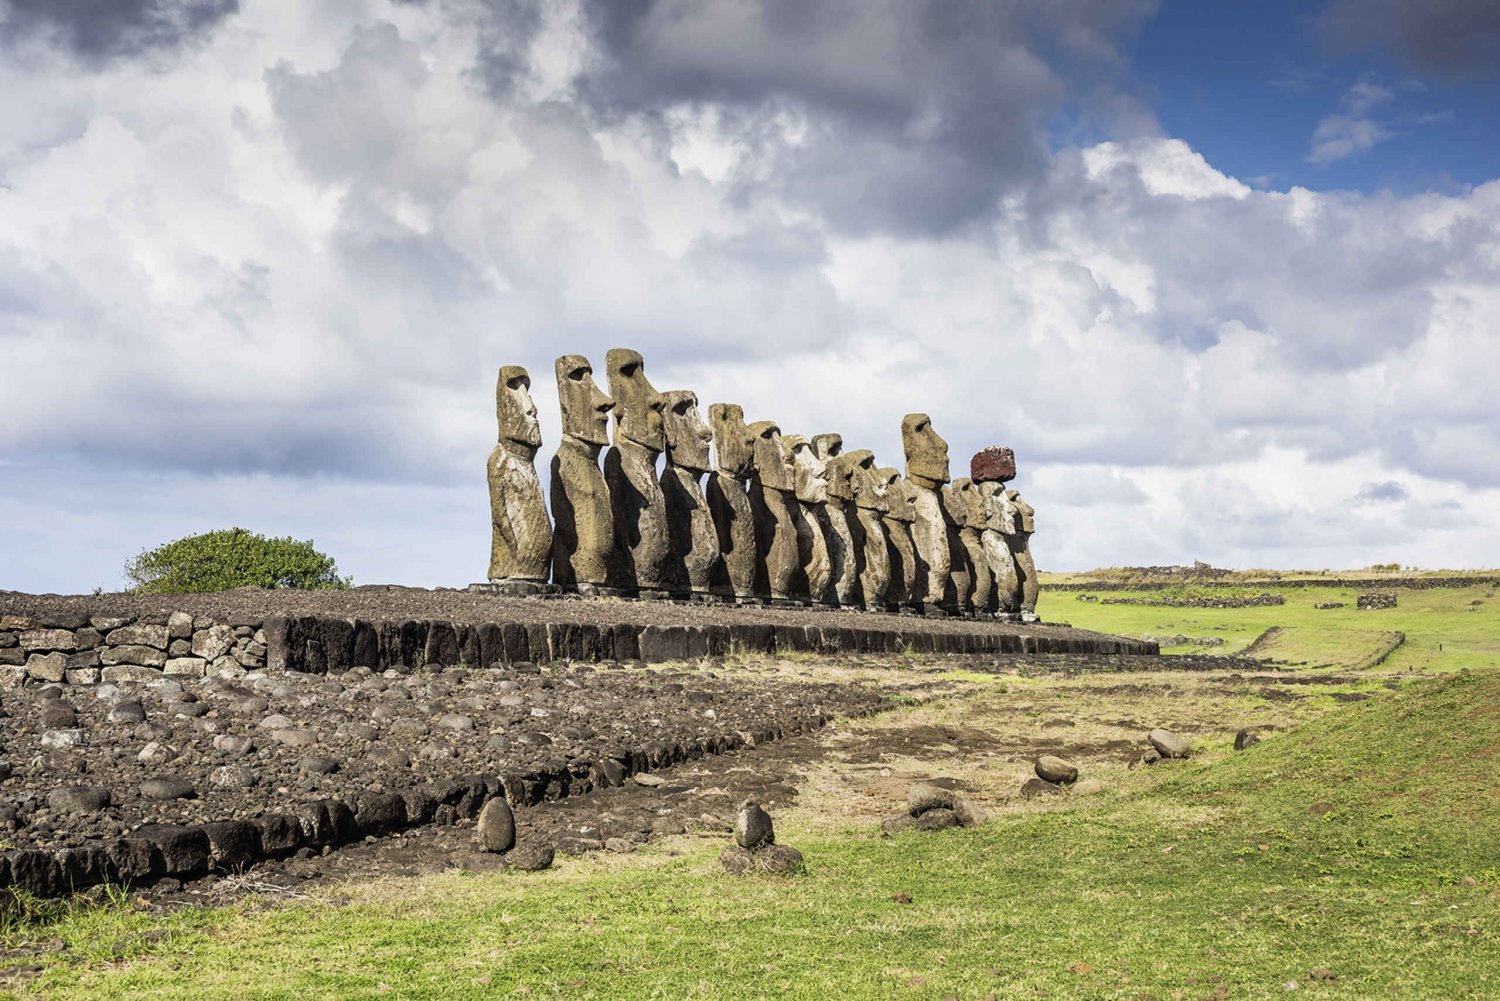 Things to do in Easter Island